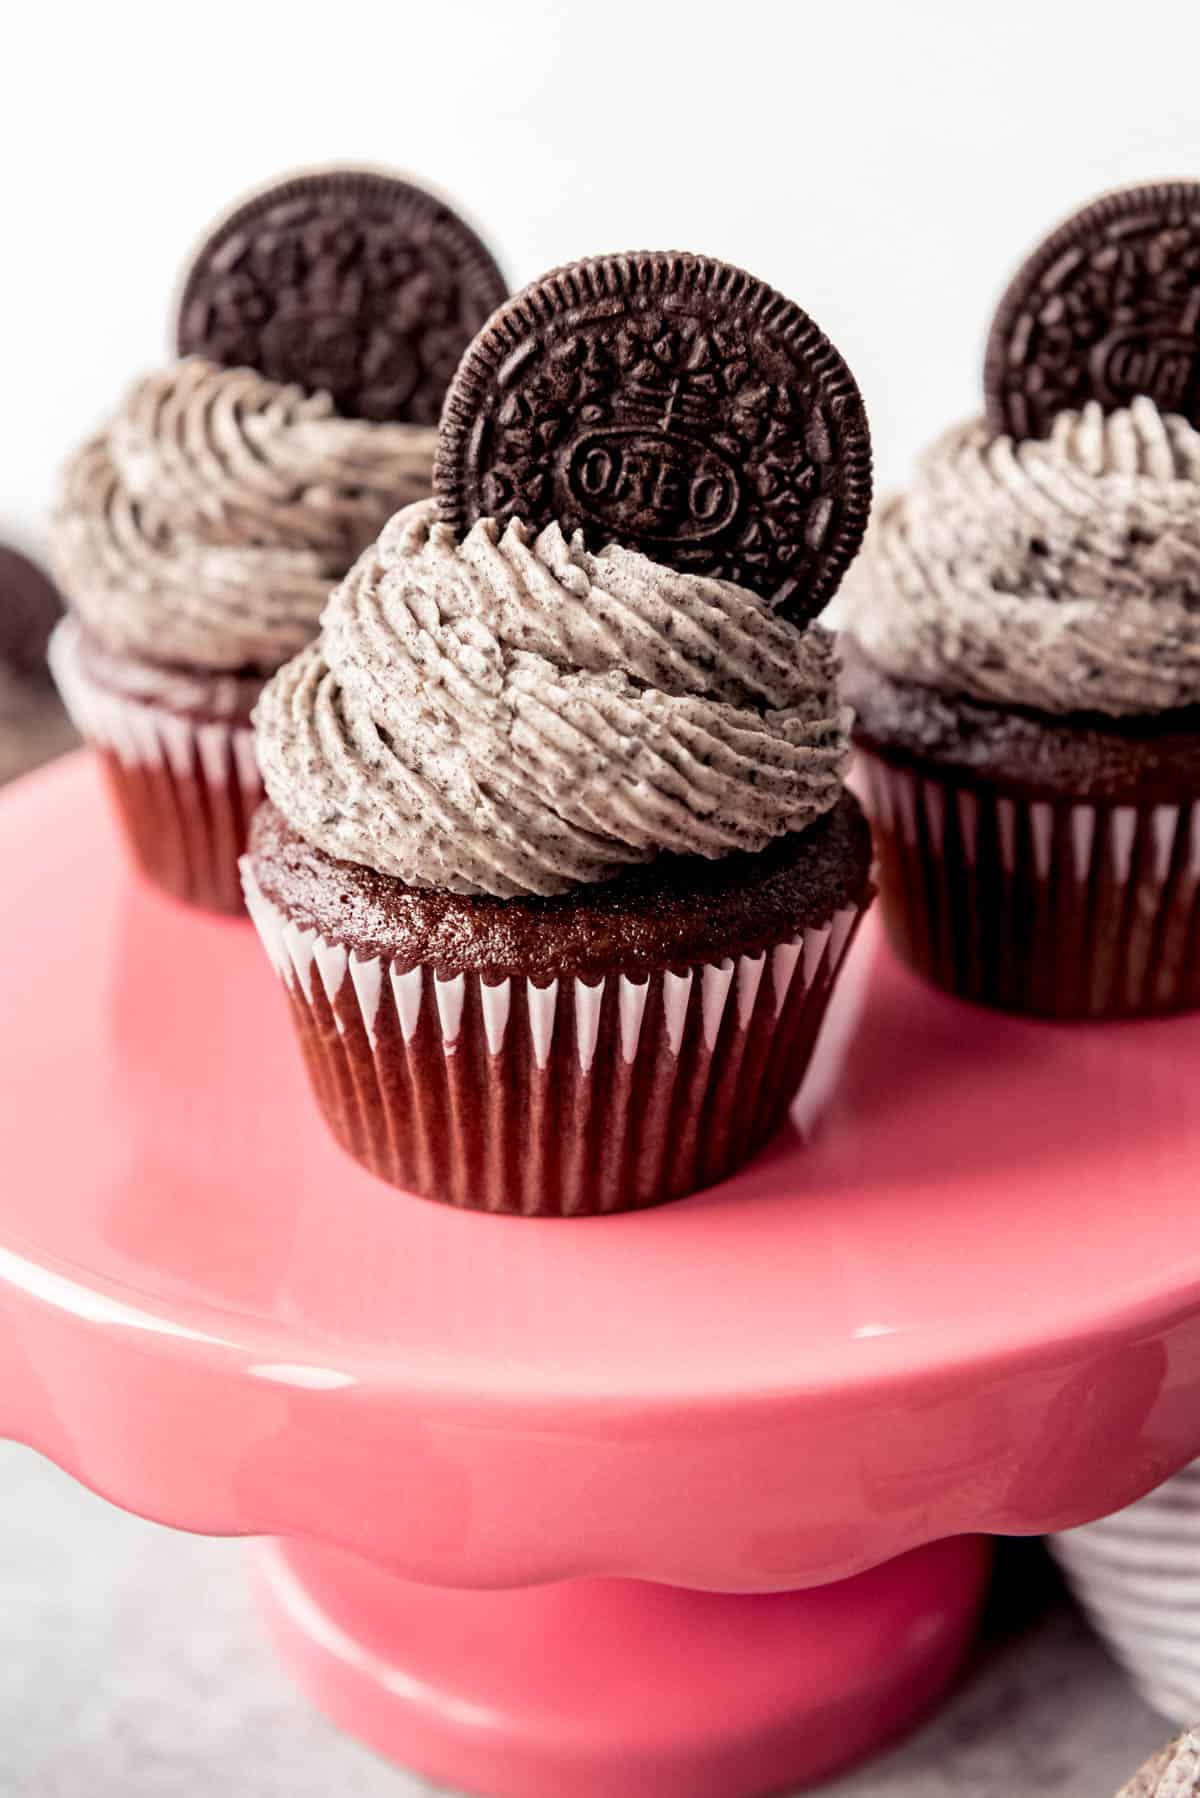 An image of chocolate cookies and cream cupcakes.